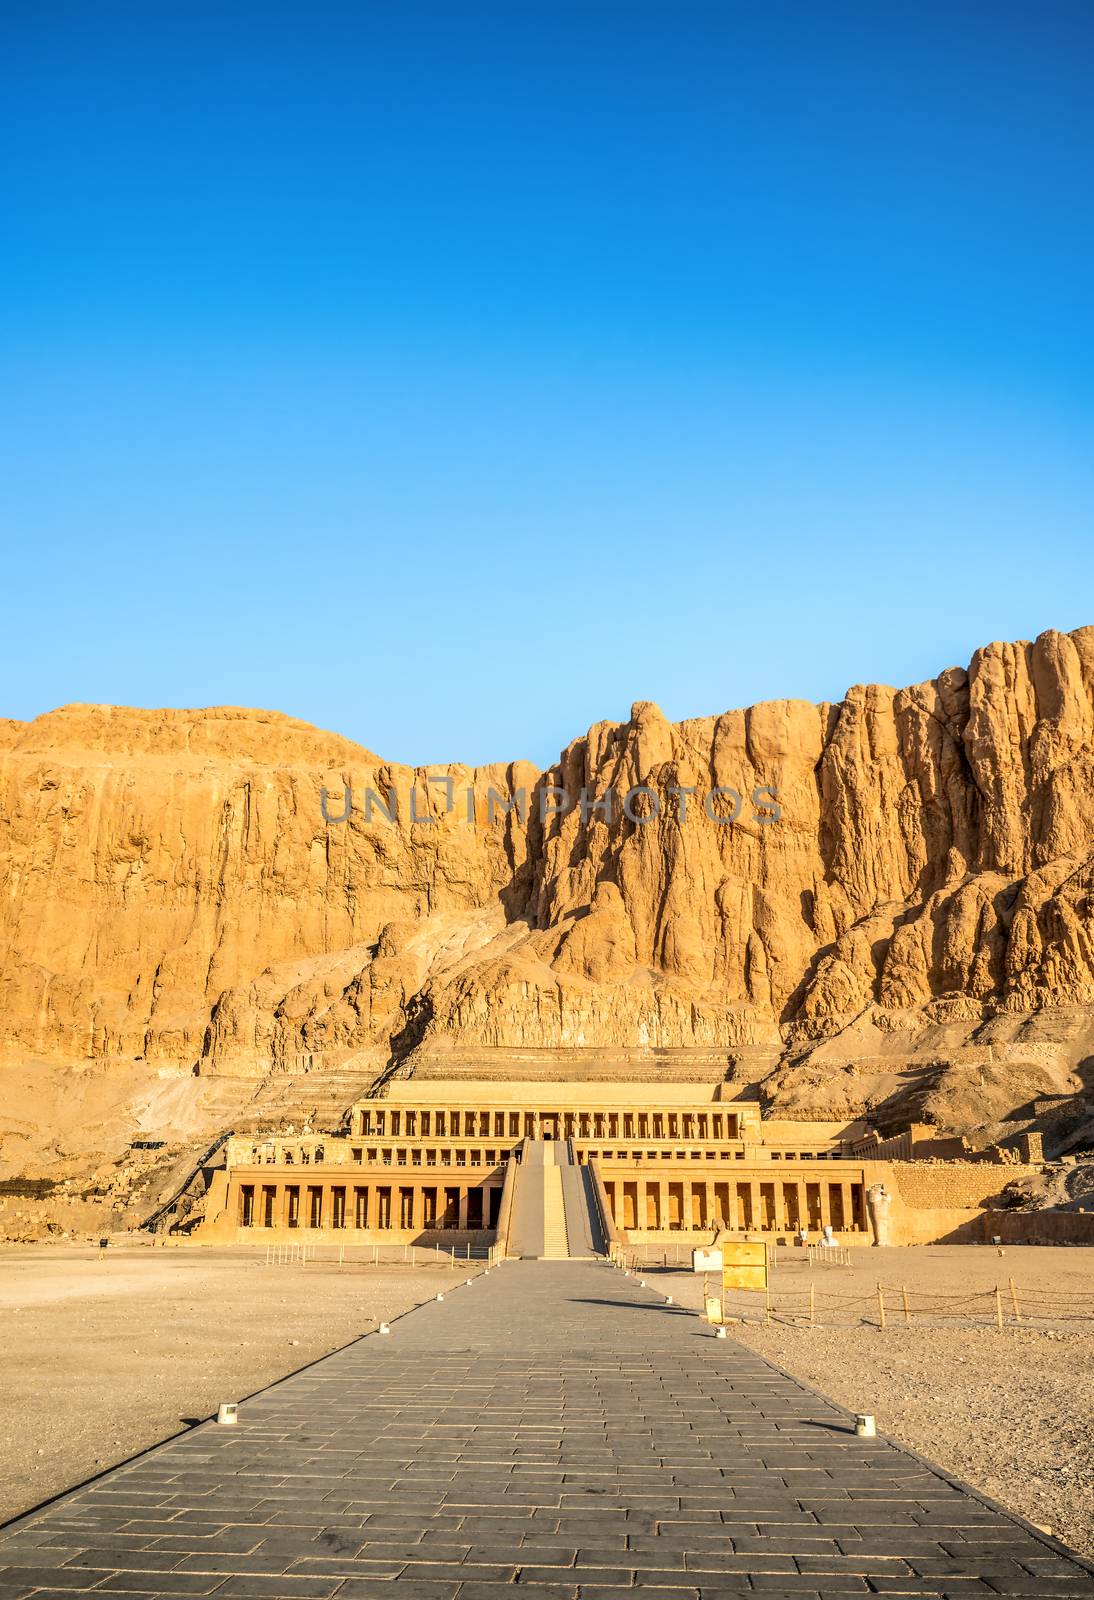 View of Queen Hatshepsut by Givaga